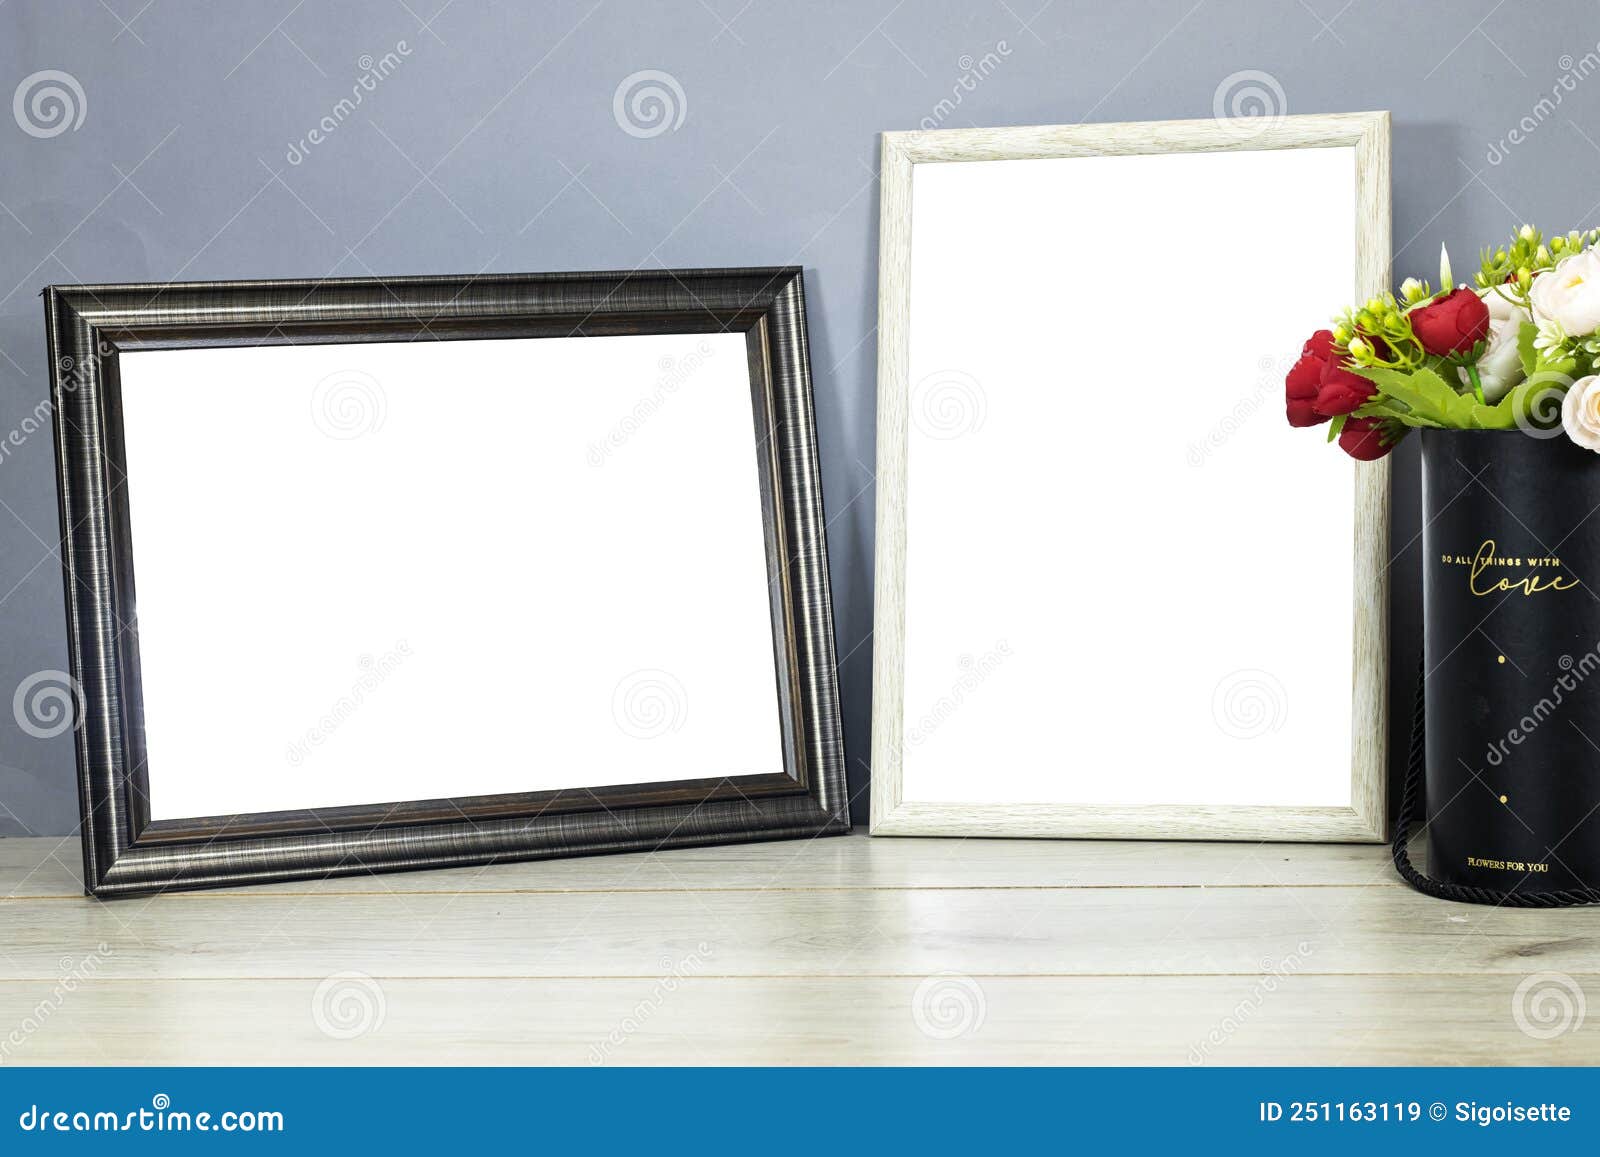 empty wooden ornate picture frames photo with bouquet of flowers on wood table